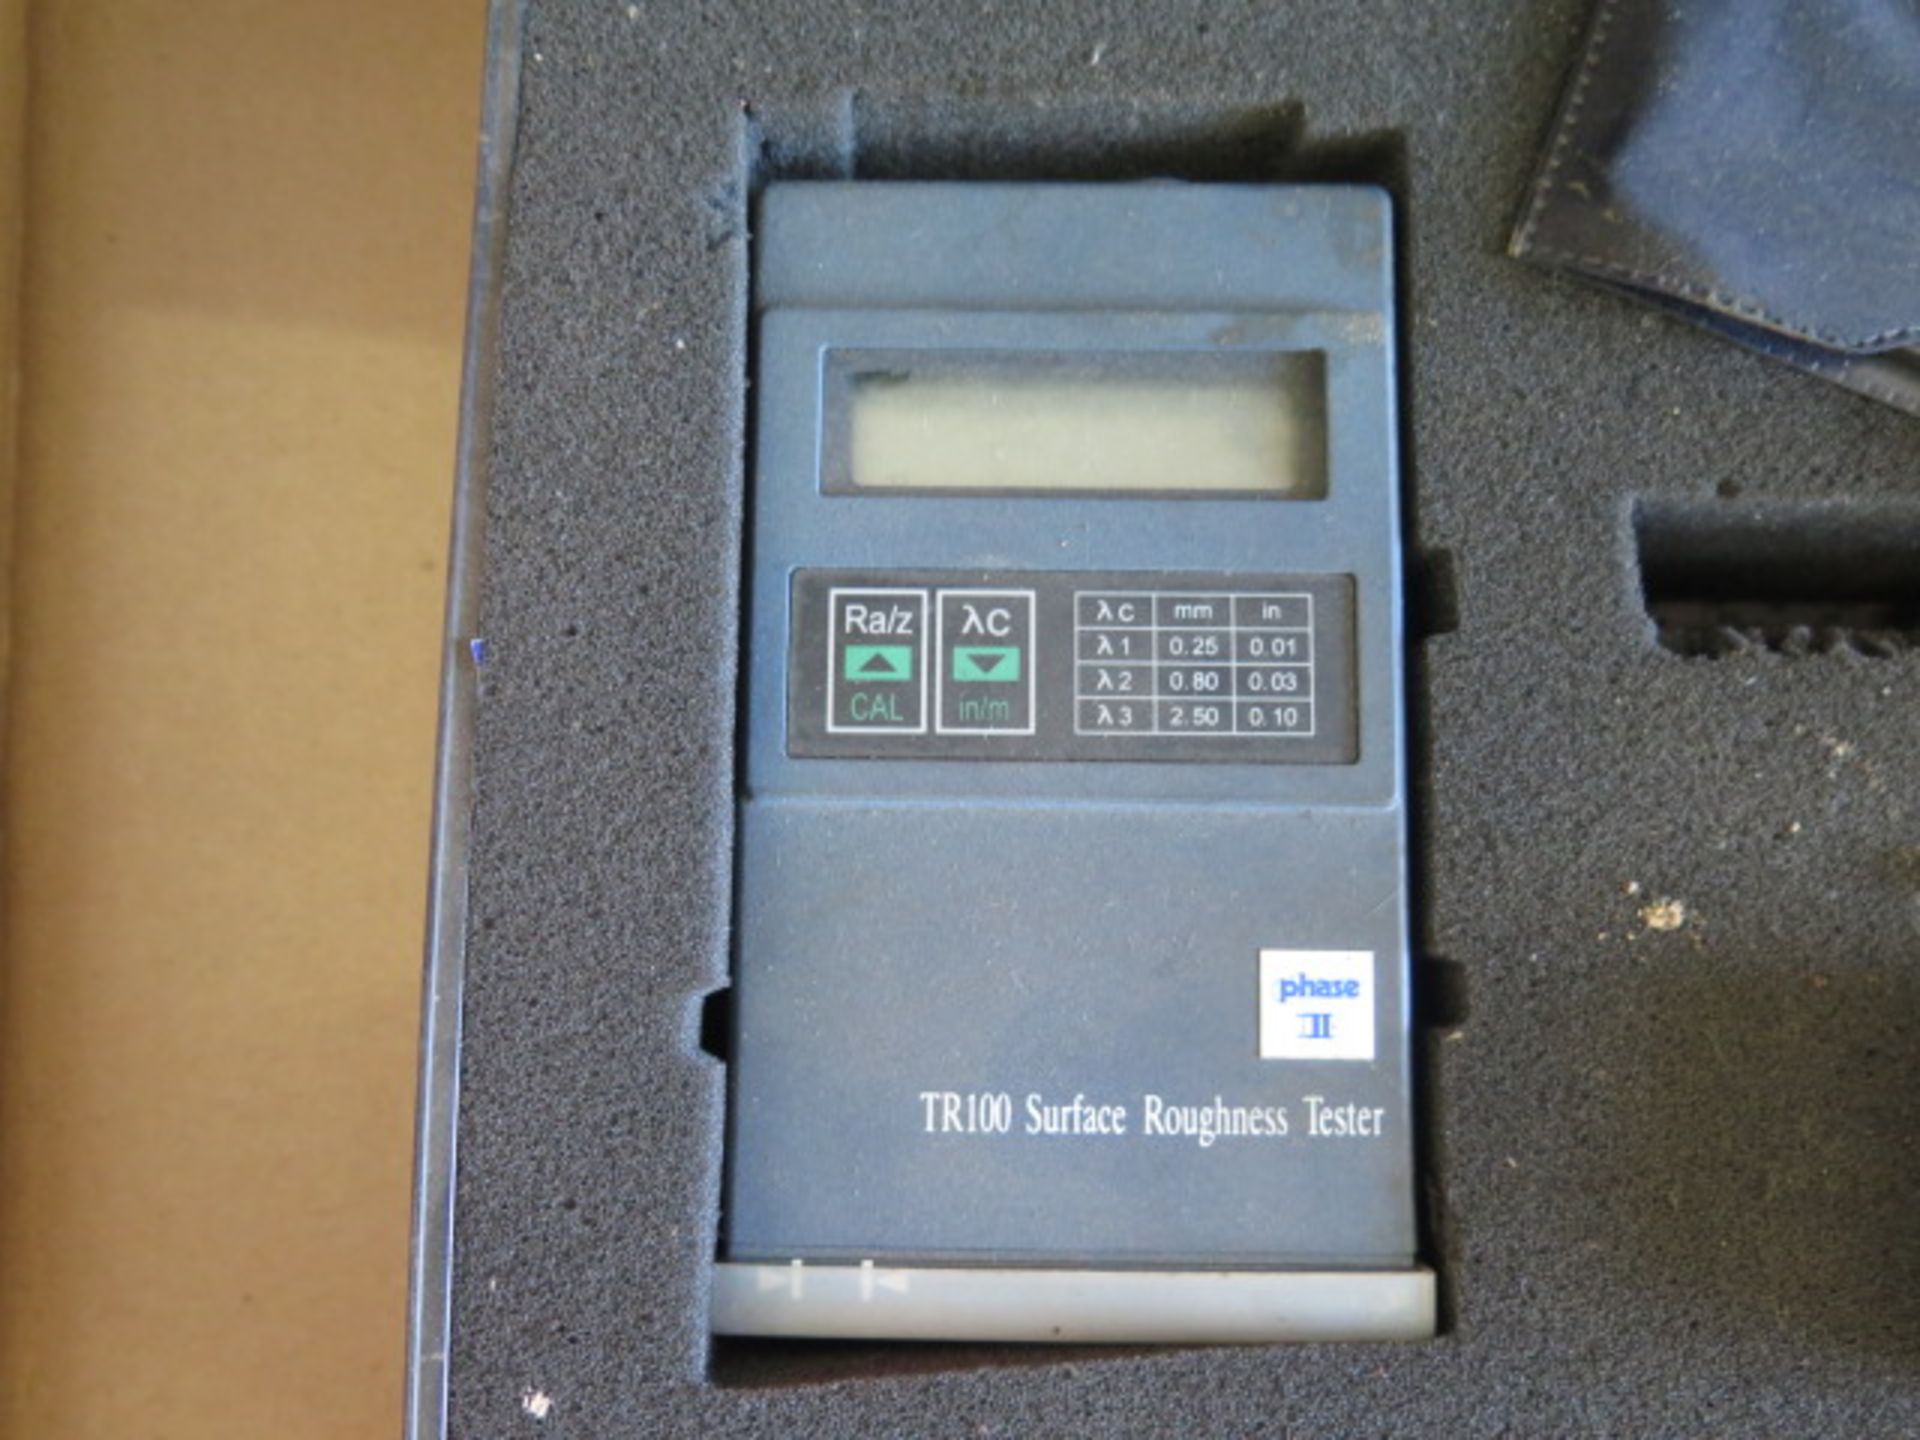 Phase II TR100 Digital Surface Roughness Tester (SOLD AS-IS - NO WARRANTY) - Image 3 of 5